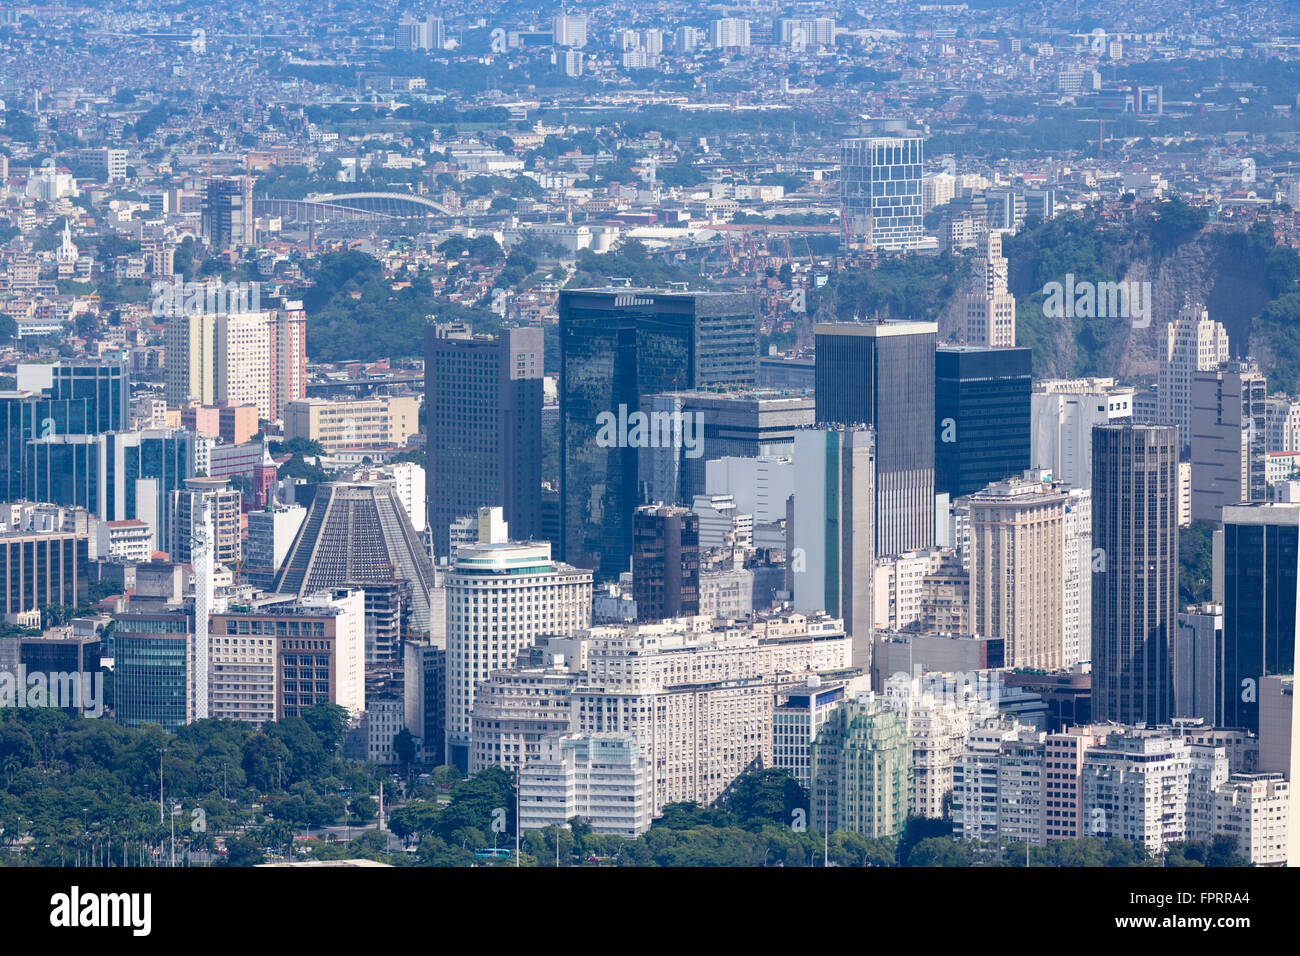 Downtown Rio de Janeiro, commercial buildings in the city centre with the Metropolitan Cathedral & Petrobras headquarters, Brazil, South America Stock Photo